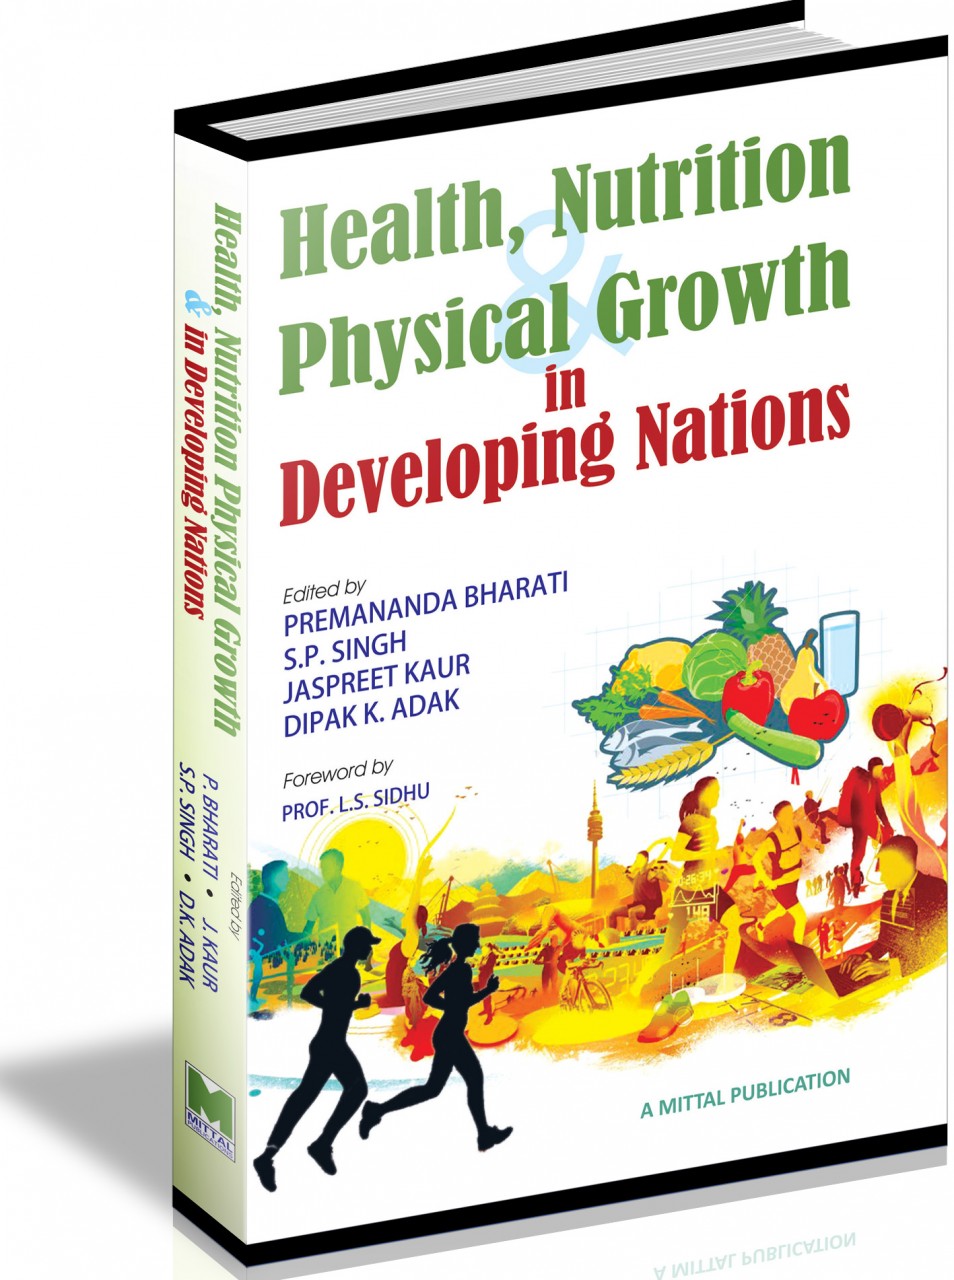 Health, Nutrition and Physical Growth in Developing Nations